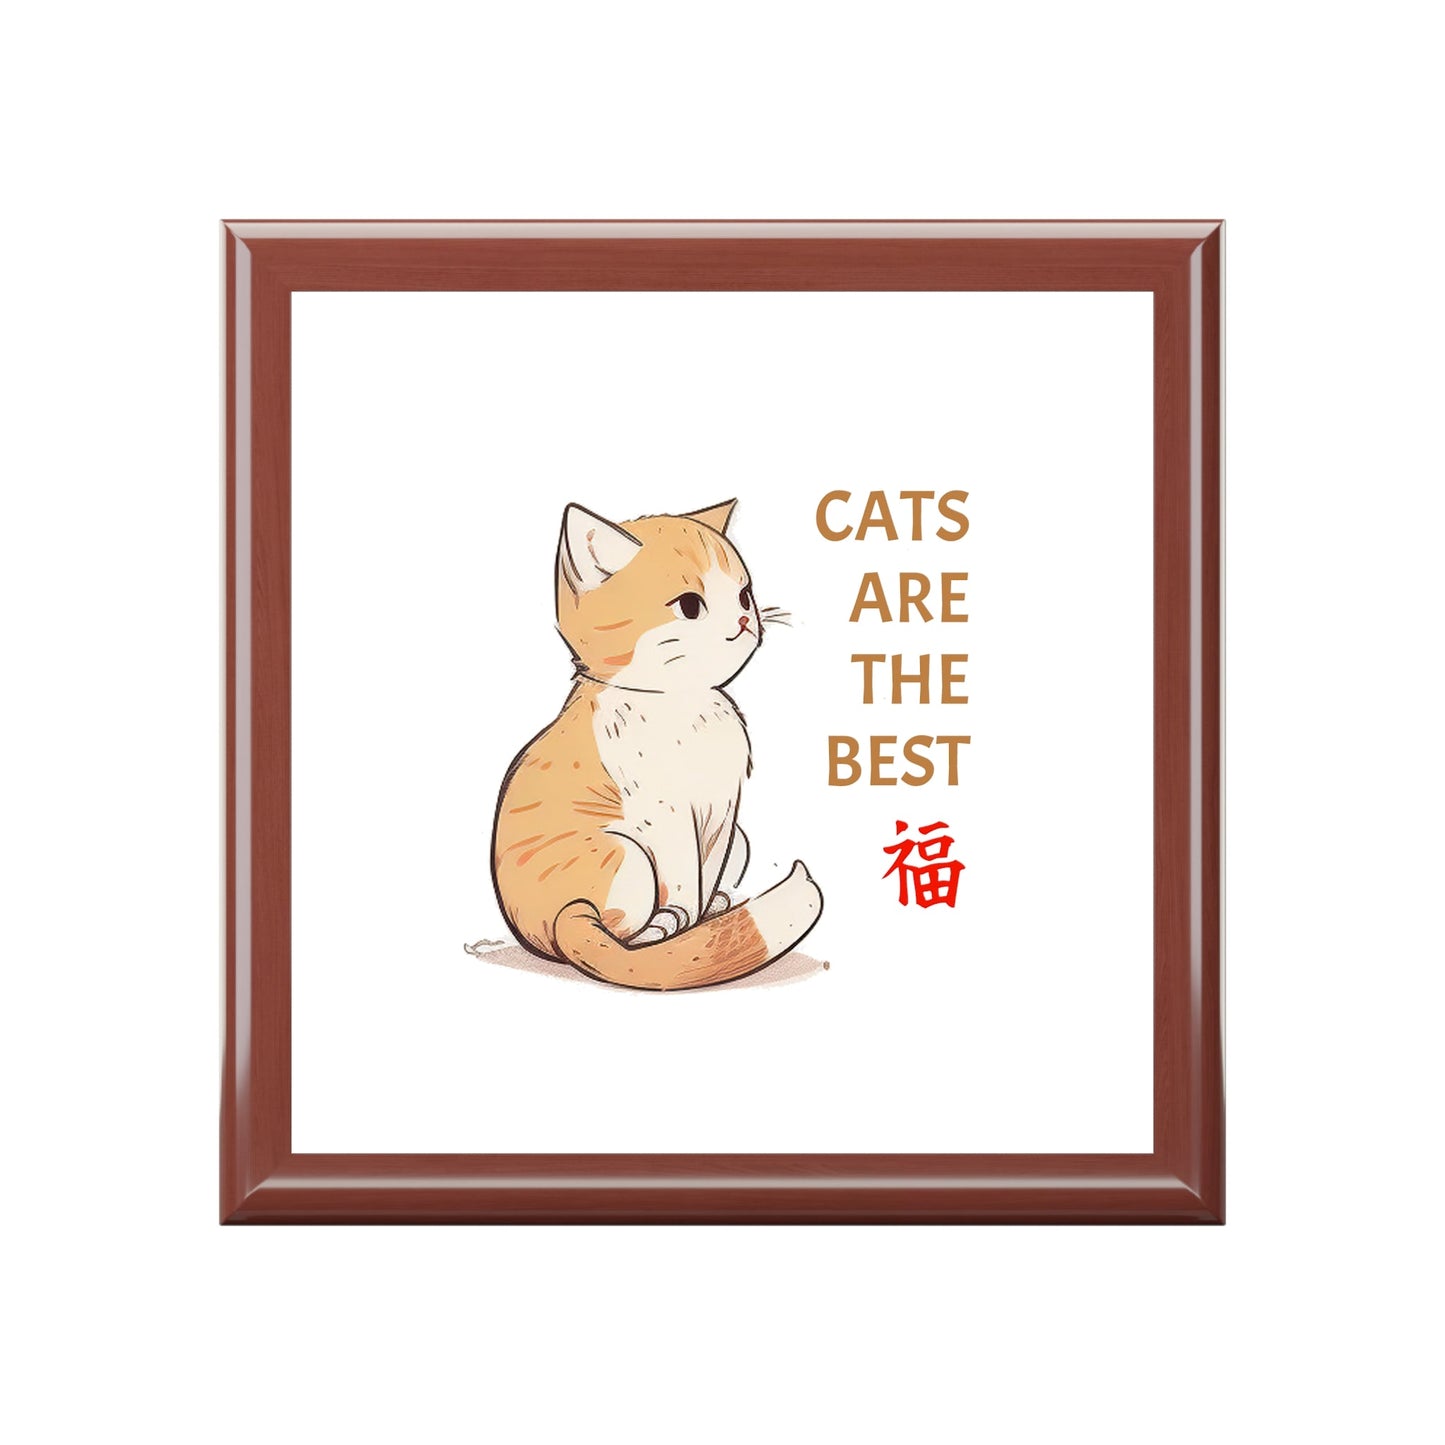 Cats are the Best Keepsake Jewelry Box with Ceramic Tile Cover Beige